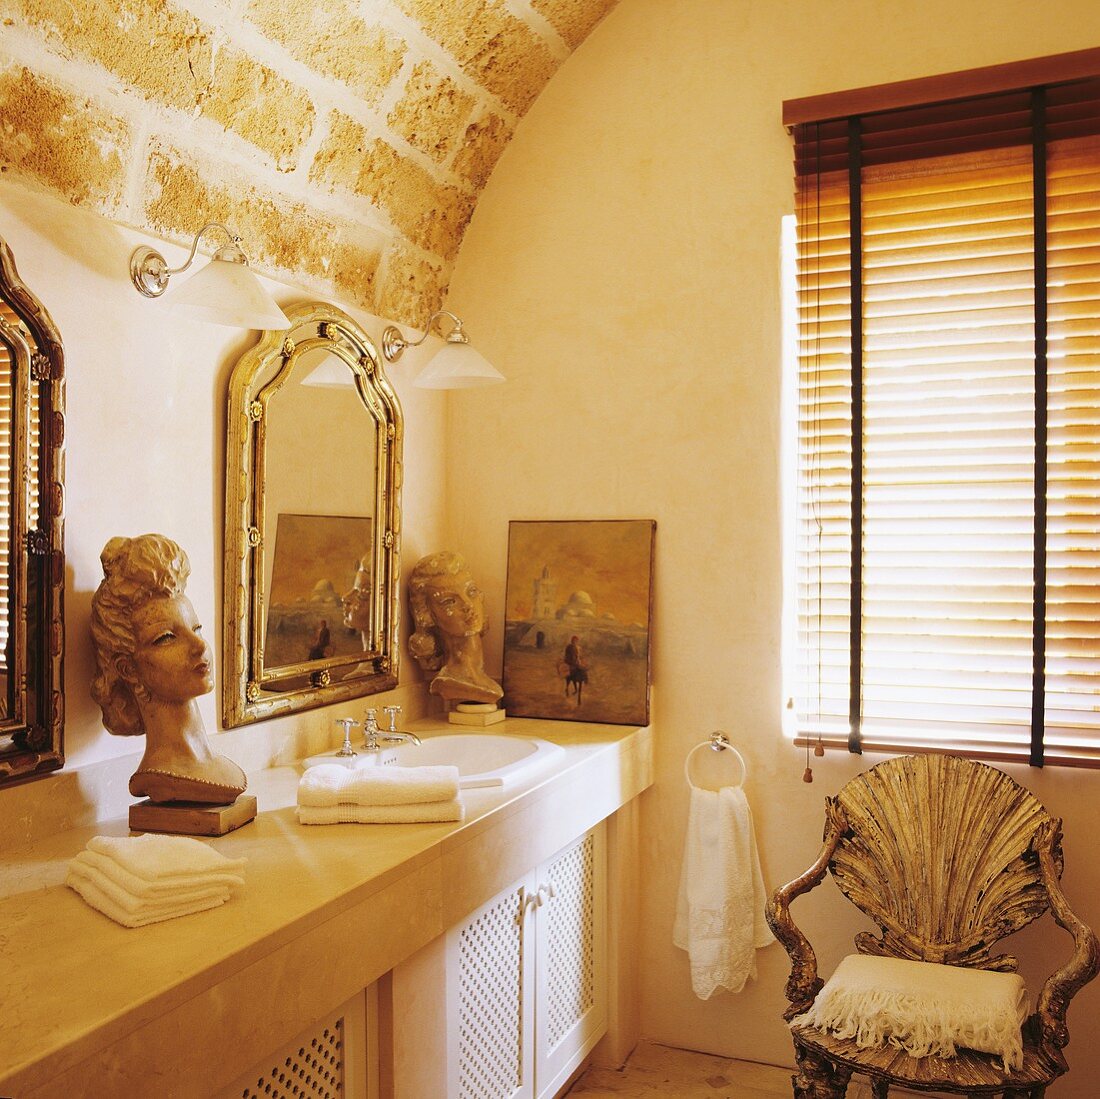 Diffused light in a bathroom with a rustic vaulted ceiling